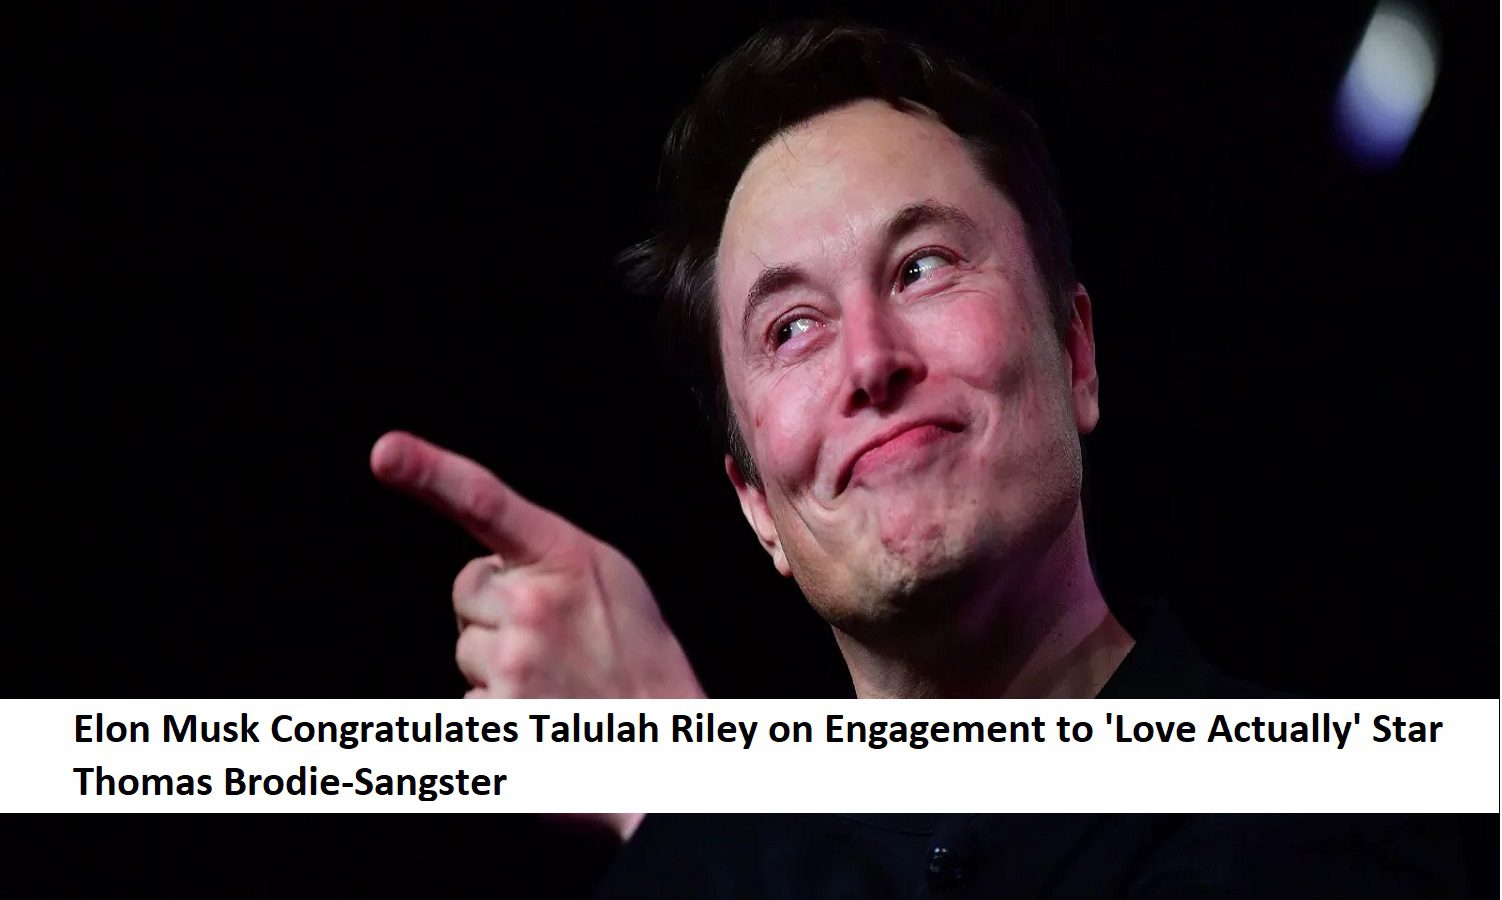 Elon Musk Congratulates Talulah Riley on Engagement to 'Love Actually' Star Thomas Brodie-Sangster